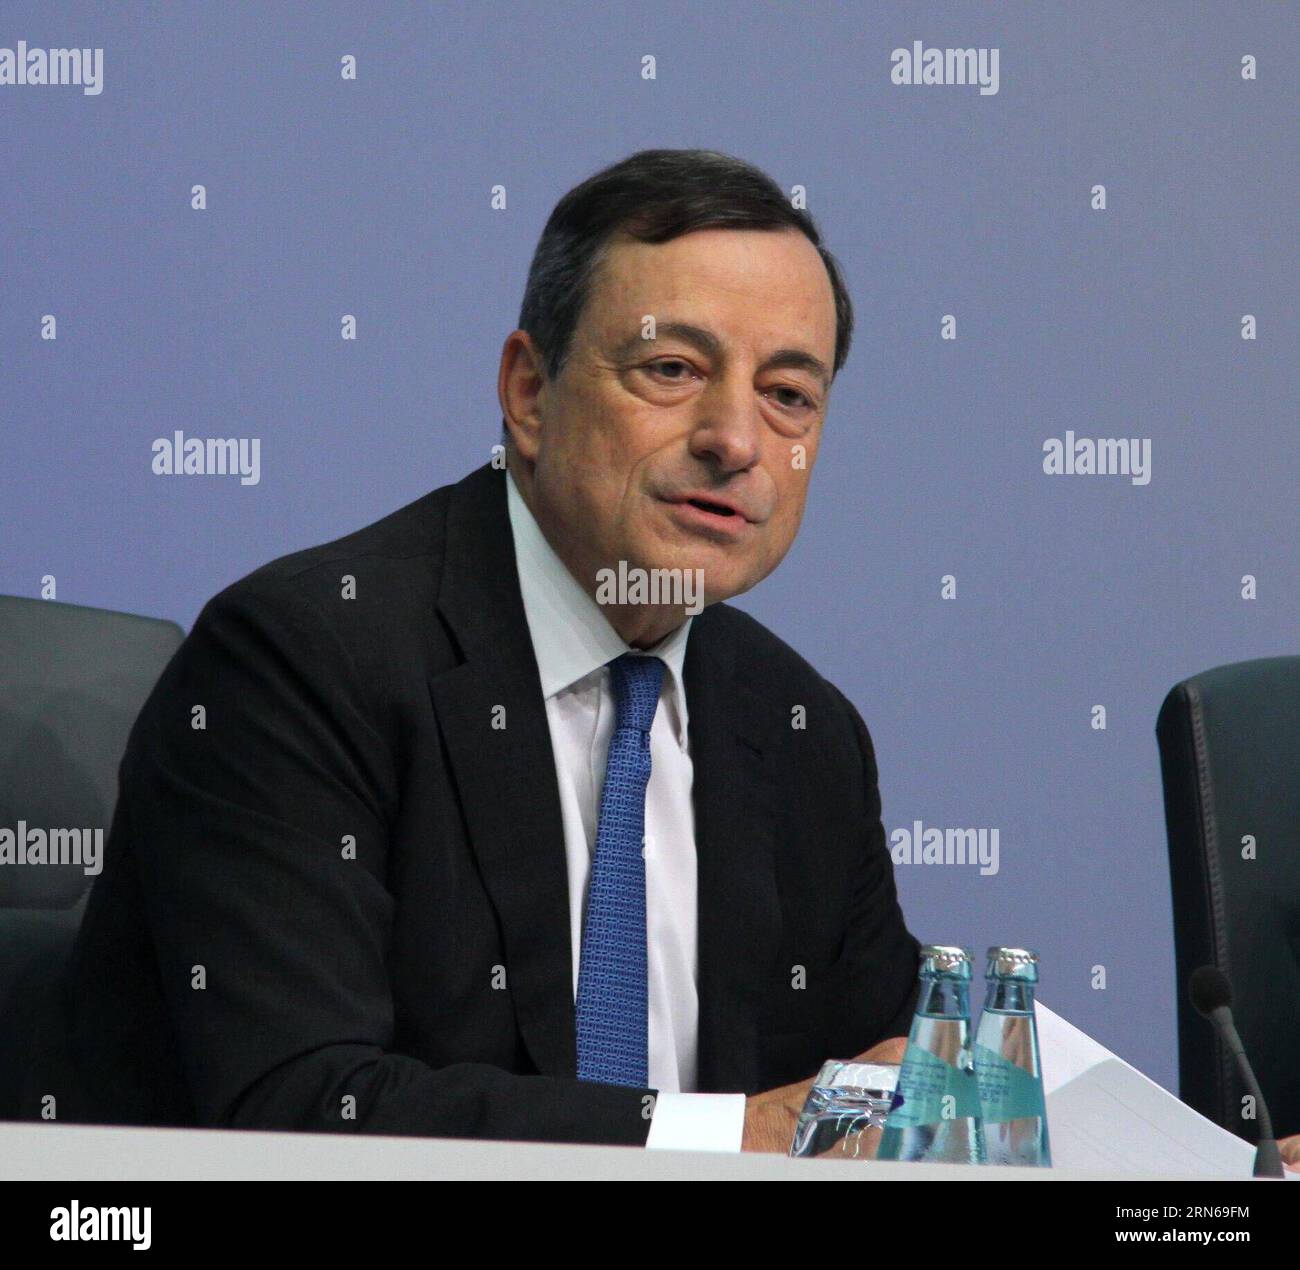 (150716) -- FRANKFURT, July 16, 2015 -- The European Central Bank President Mario Draghi attends a press conference in Frankfurt, Germany, July 16, 2015. ECB governing council on Thursday decided to raise the Emergency Liquidity Assistance to Greek banks by 900 million euros (about 981 million U.S. dollars). ) GERMANY-GREECE-DEBT-EU-ECB-BANK RaoxBo PUBLICATIONxNOTxINxCHN   150716 Frankfurt July 16 2015 The European Central Bank President Mario Draghi Attends a Press Conference in Frankfurt Germany July 16 2015 ECB governing Council ON Thursday decided to Raise The EMERGENCY Liquidity Assistanc Stock Photo